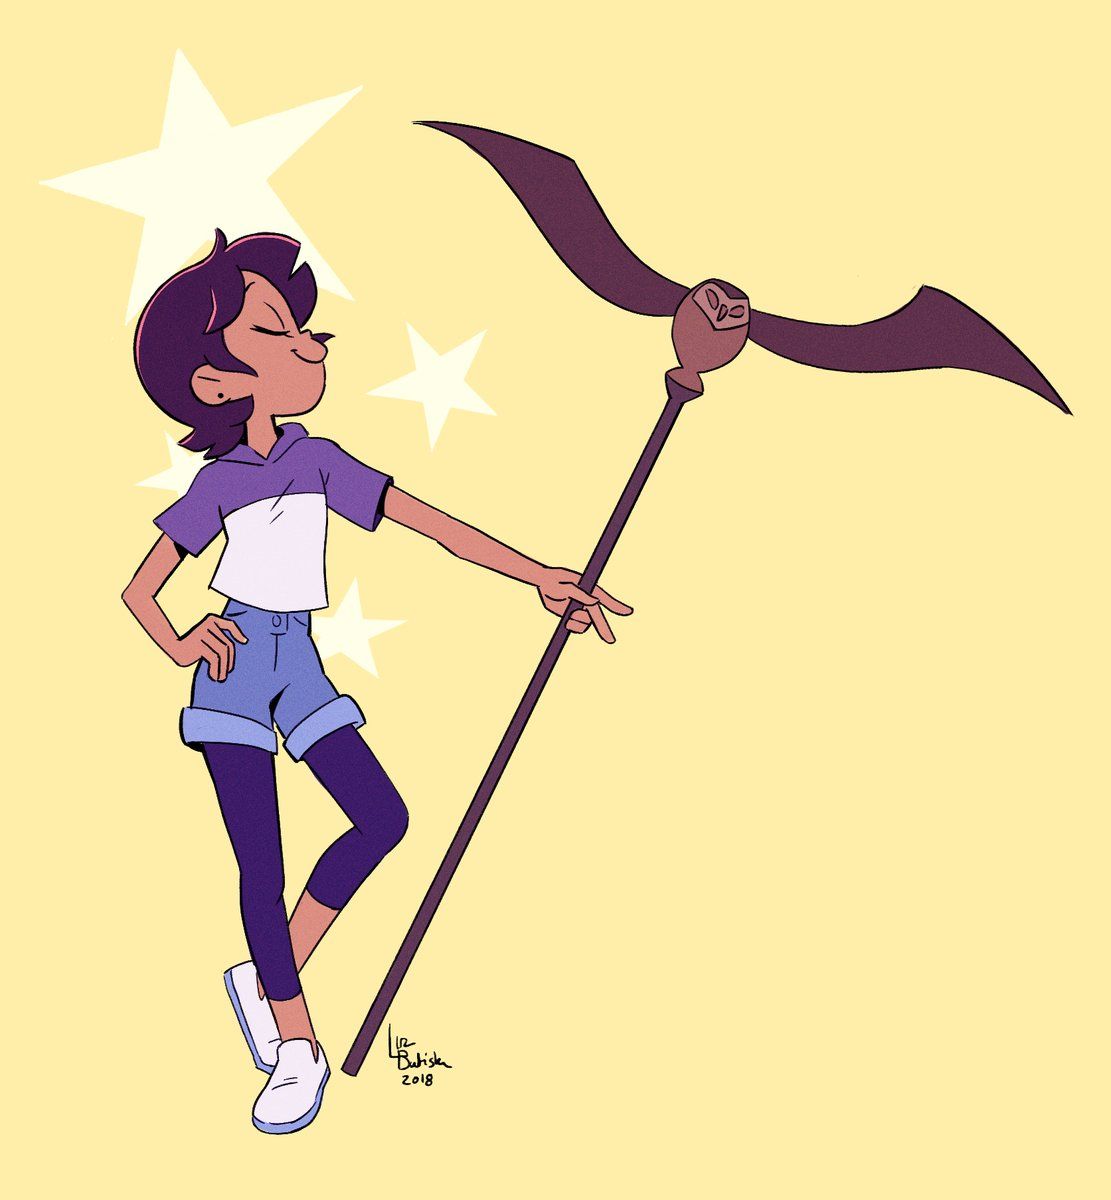 5/? A witch is not complete without her staff and in Escape of the Palisman Luz earned Owlbert's trusts so he will lend her his power. Credit to  @johnny_octopus for the image  https://twitter.com/johnny_octopus/status/1025535117429628929?s=20  #TheOwlHouse  #TheOwlHouseSpoilers  #TheOwlHosue  #TheOwlLady